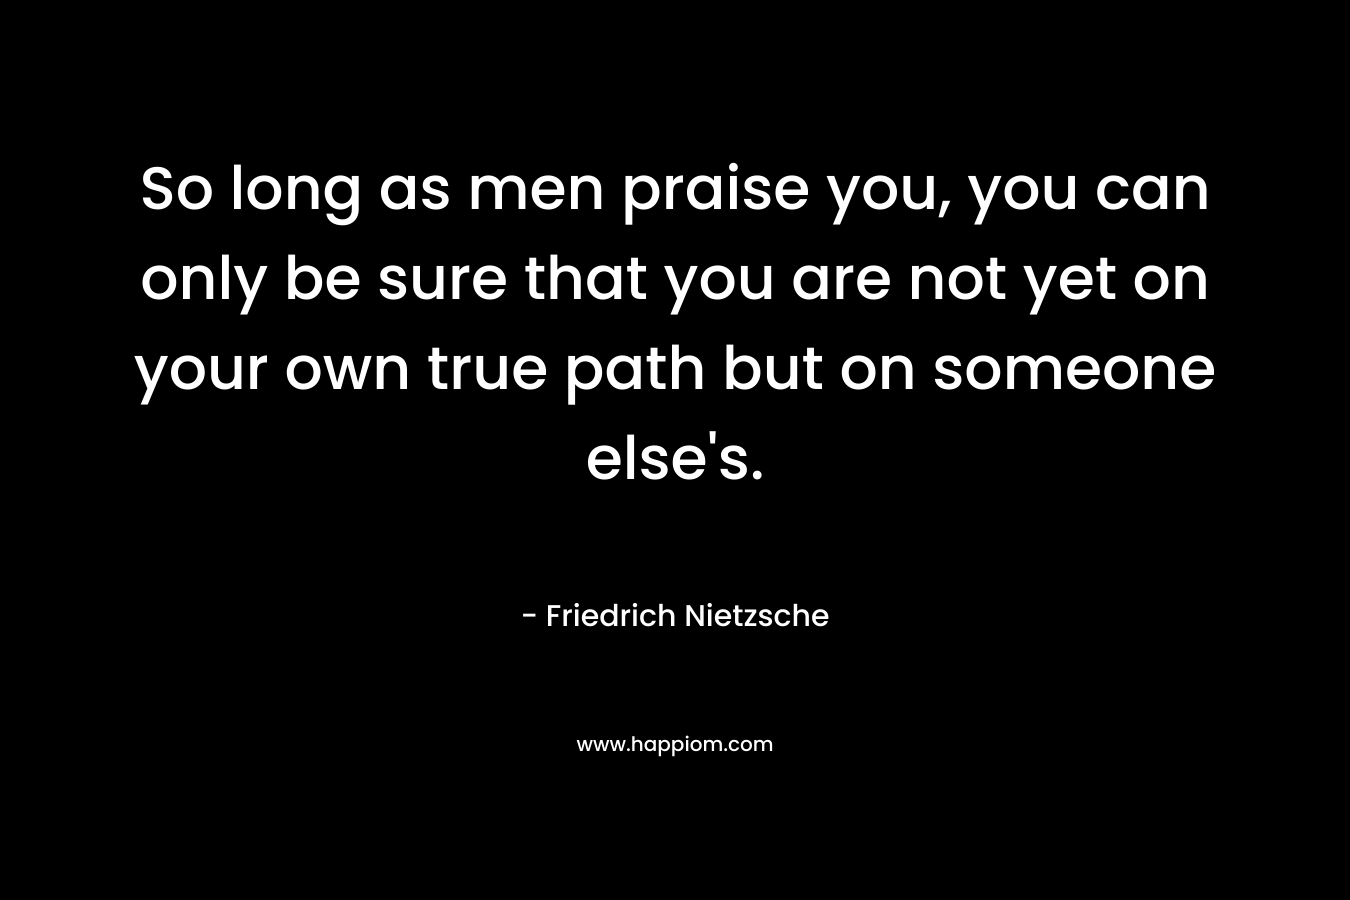 So long as men praise you, you can only be sure that you are not yet on your own true path but on someone else's.